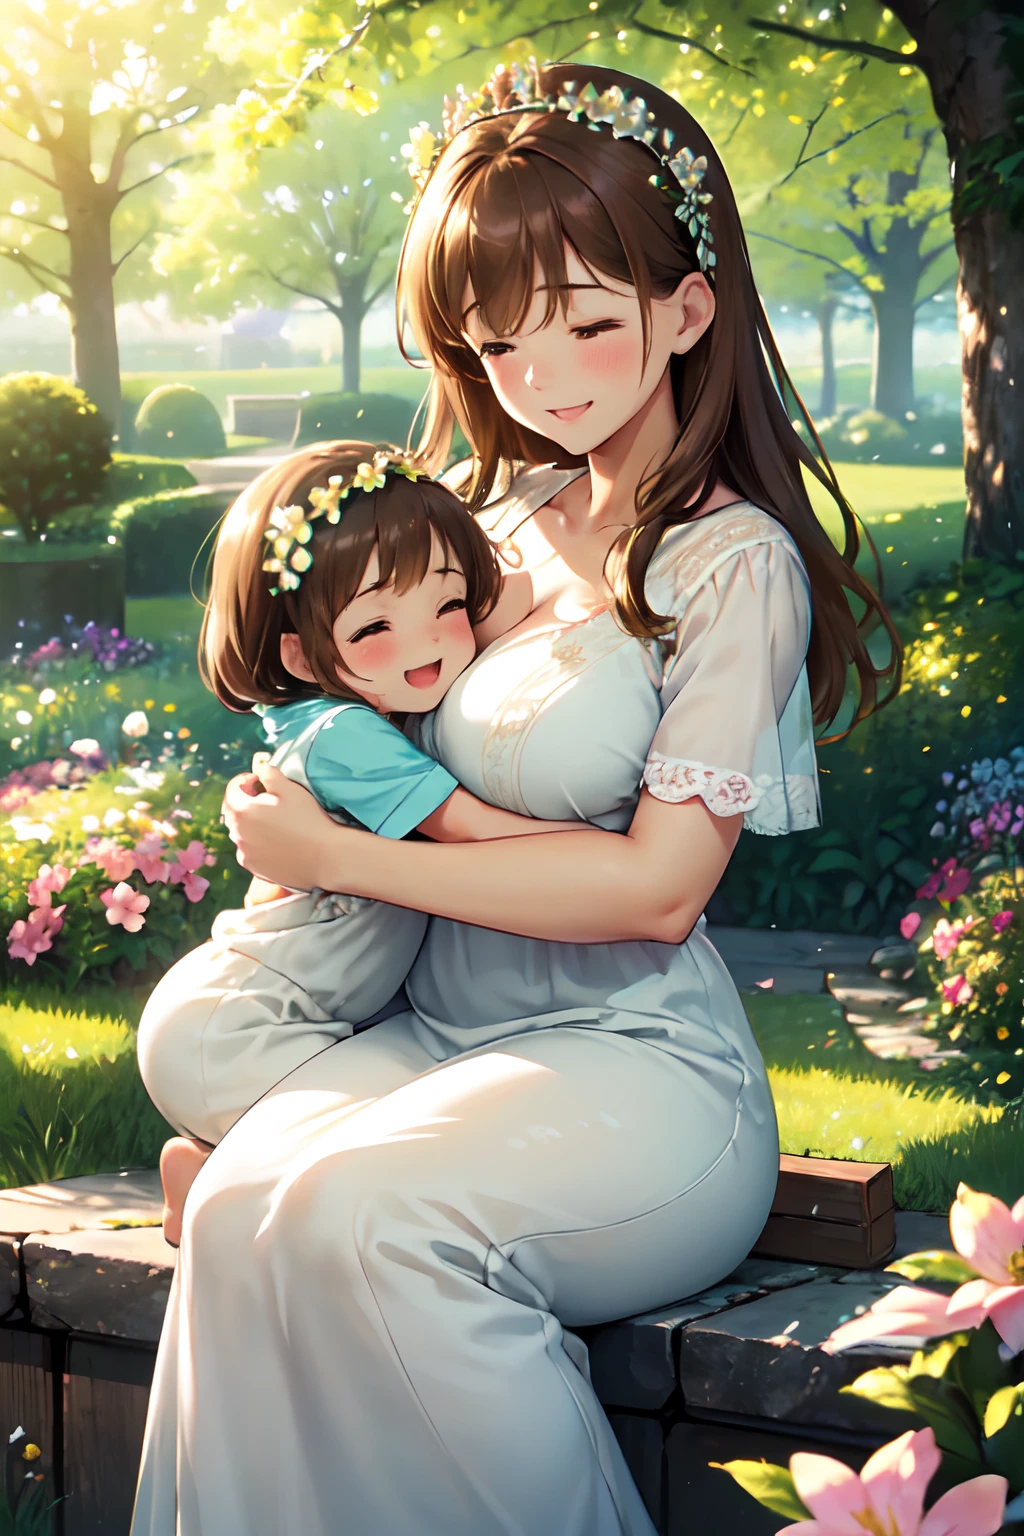 (High quality, High resolution, Fine details, Realistic), (happy child), light brown hair, (flowers crown), (mother-child bond), gorgeous flowers, colorful garden, happy atmosphere, (Curvy women), light brown hair, sparkling eyes, (Detailed eyes), mother's smile, blush, Large breasts, Sweat, Oily skin, sunlight filtering through trees, soft lighting, natural surroundings, vibrant colors, gentle breeze, family love, mother's embrace, springtime, greenery, fresh blossoms, warmth, blissful, affection, joyful expression, laughter, serene ambiance, adorable, heartwarming, happiness filled air, Shallow depth of field